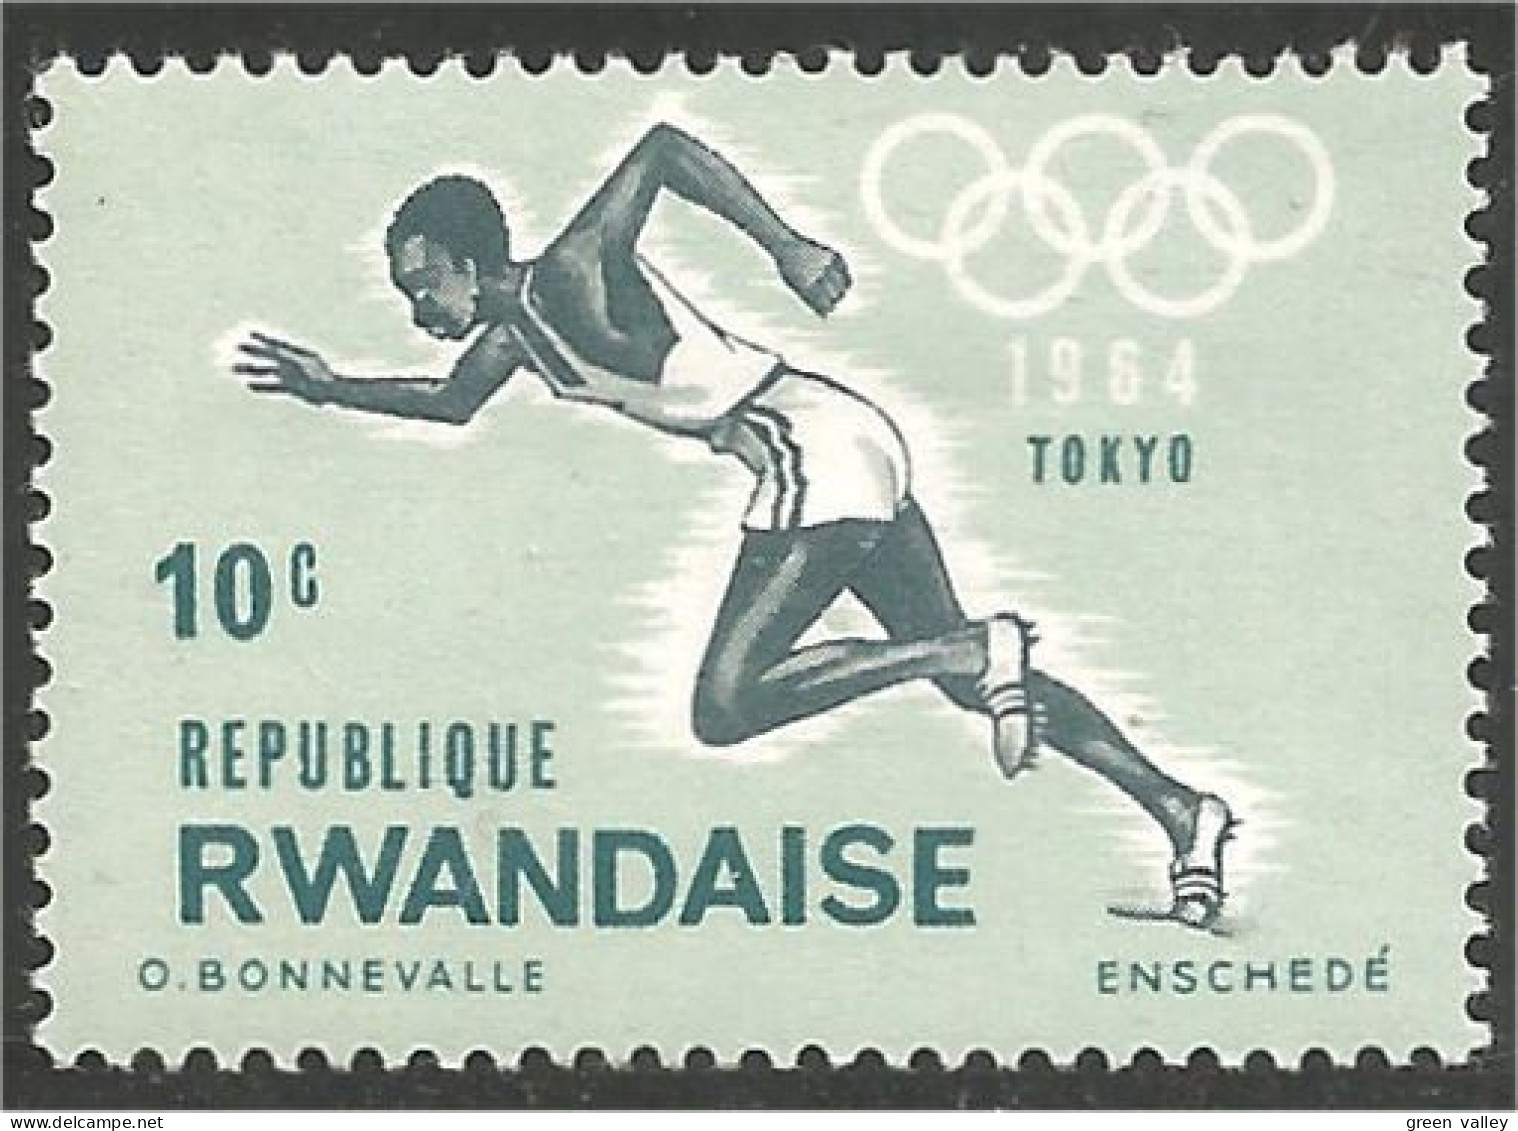 SPAT-27b Rwanda Athletisme Running Course Coureur MH * Neuf CH - Used Stamps